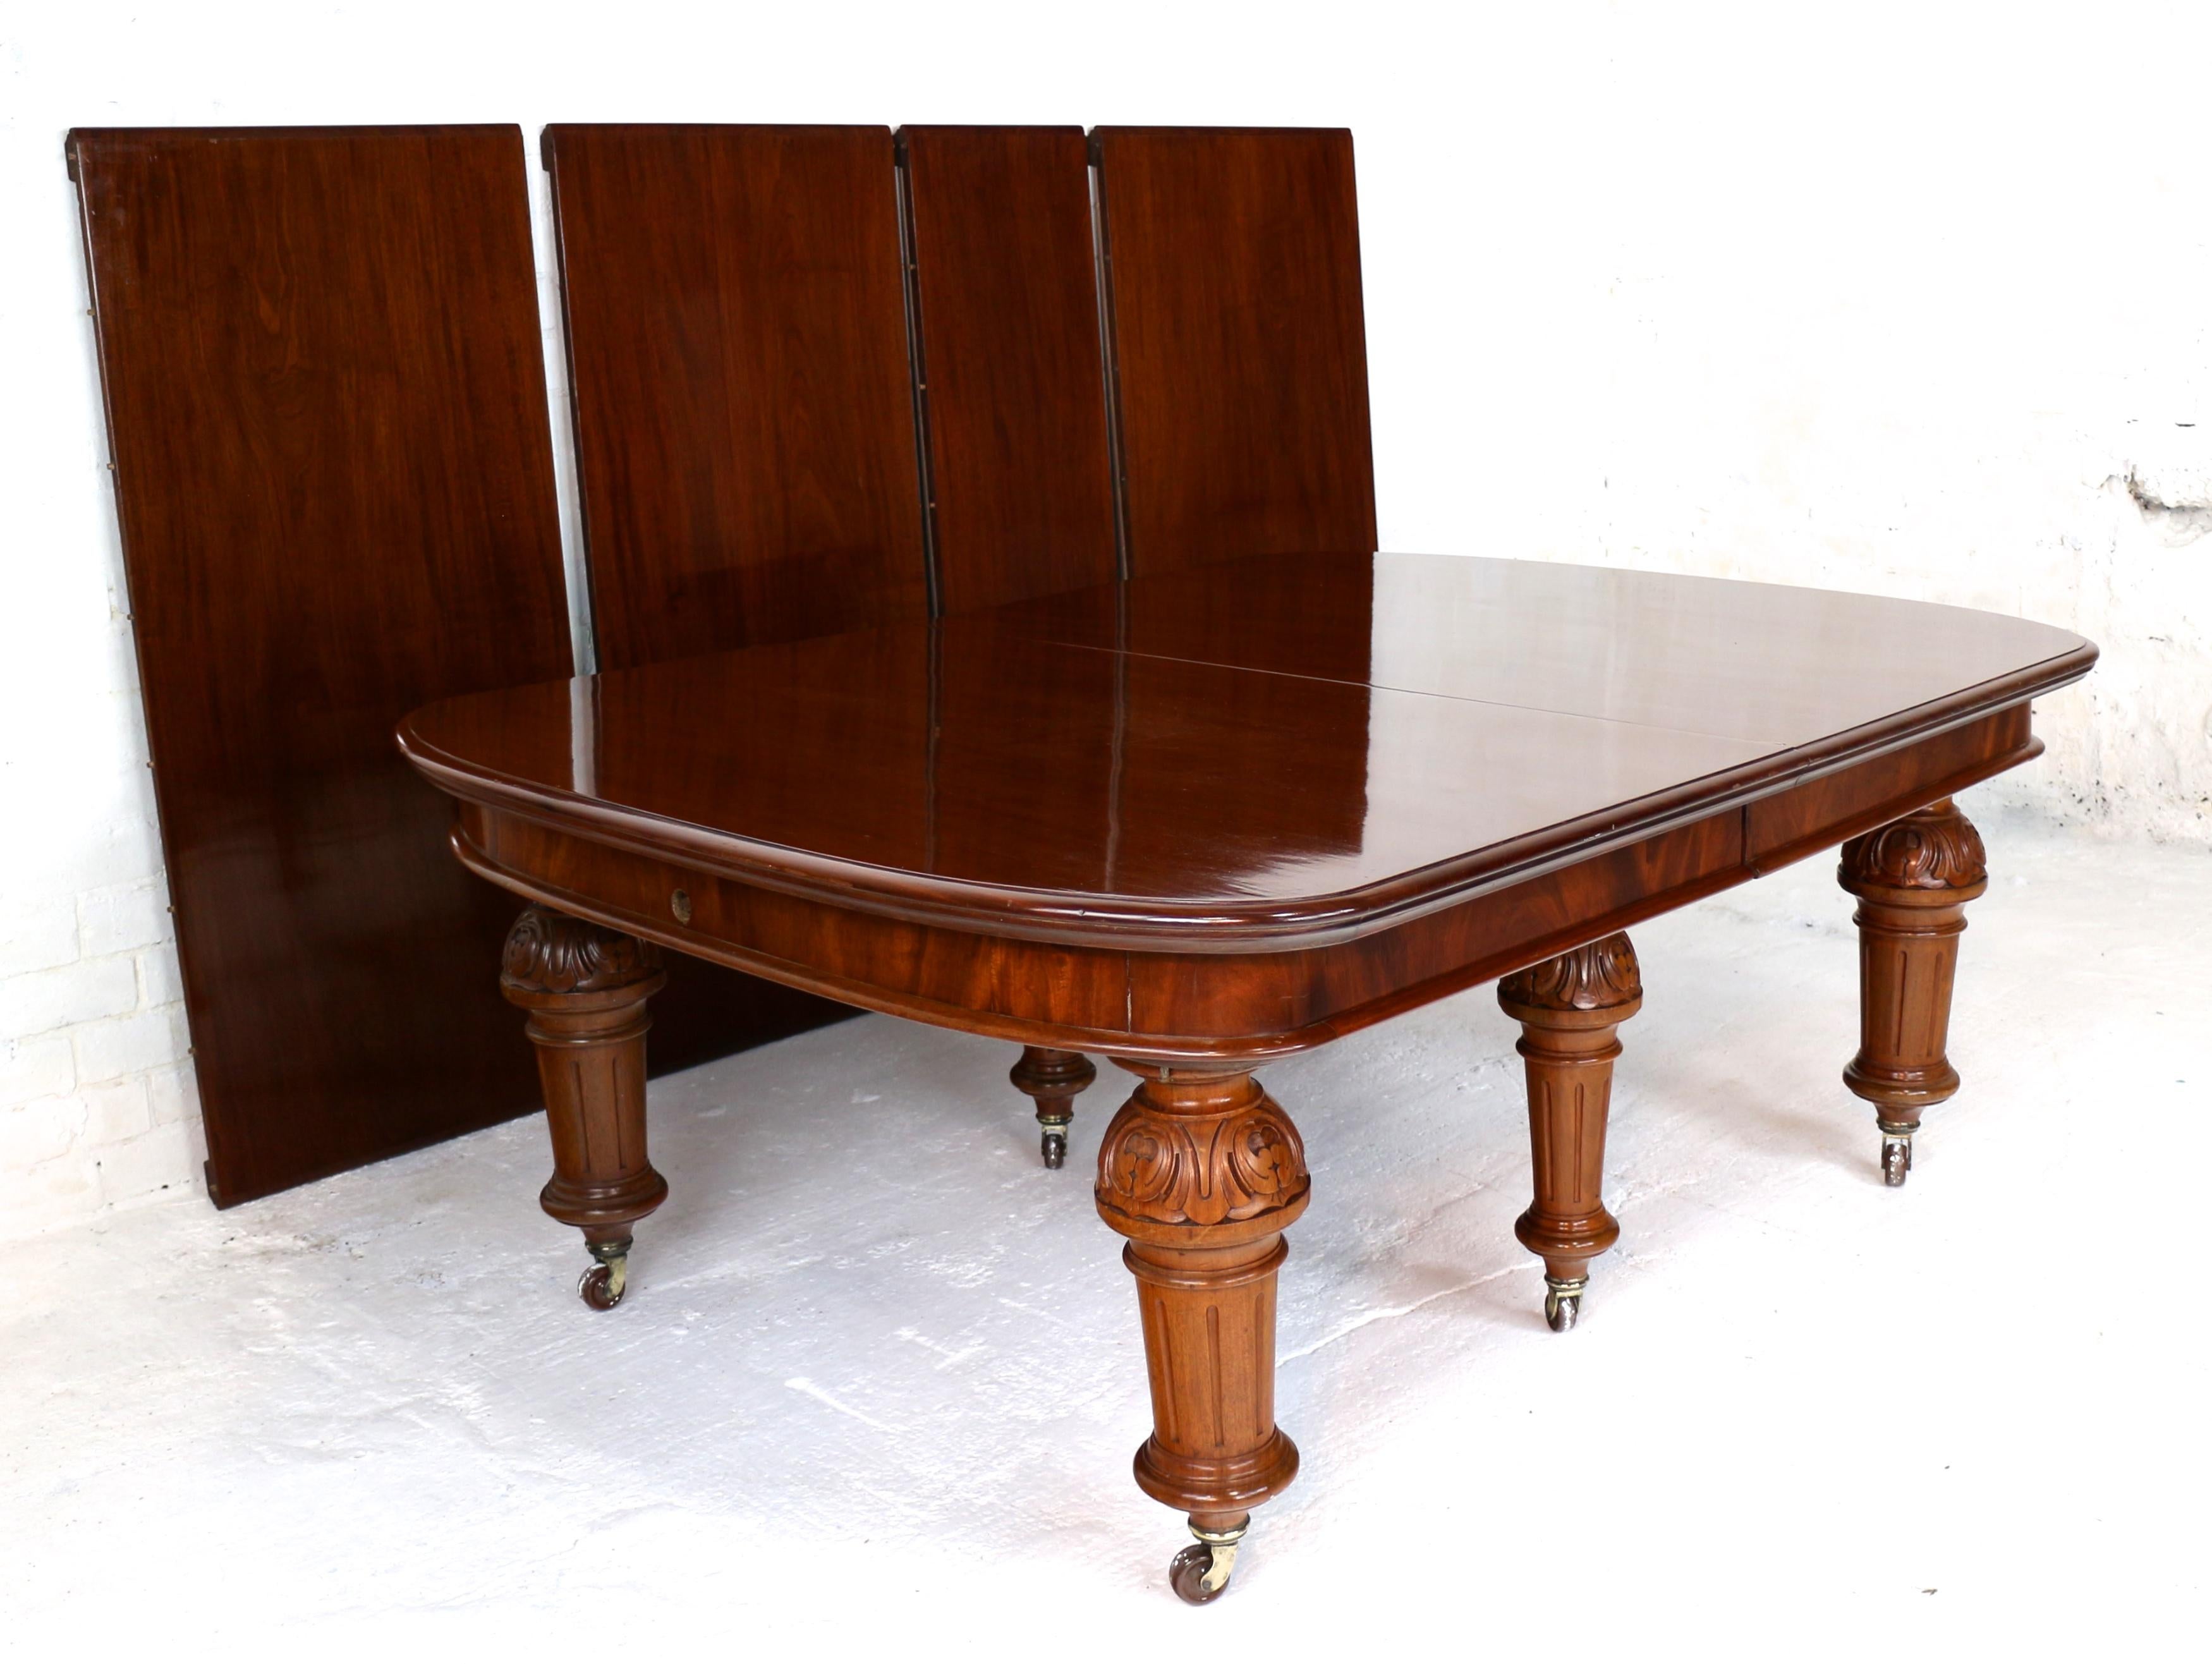 19th Century Antique English Victorian Mahogany Extending Dining Table and 4 Leaves, Seats 16 For Sale